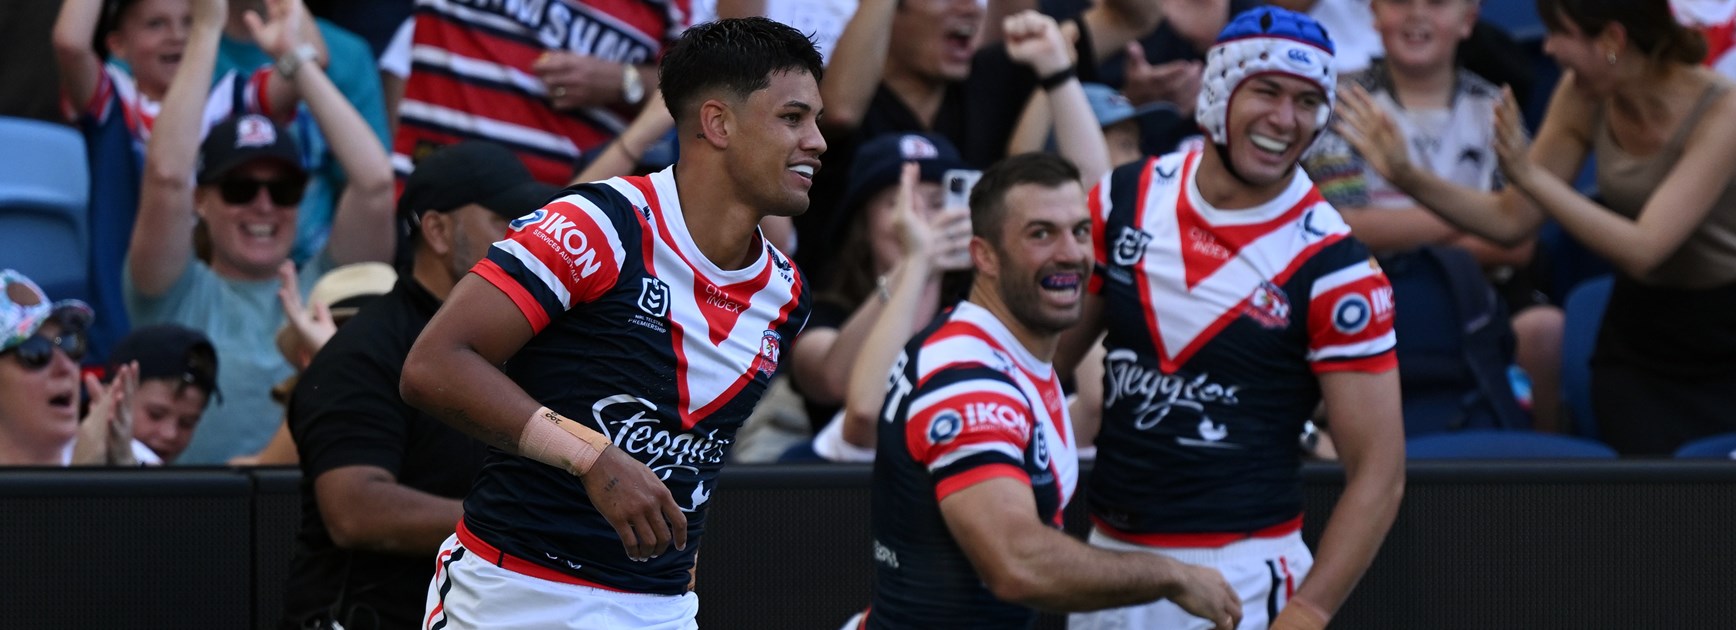 Roosters Rise to Down Warriors in Return to Allianz